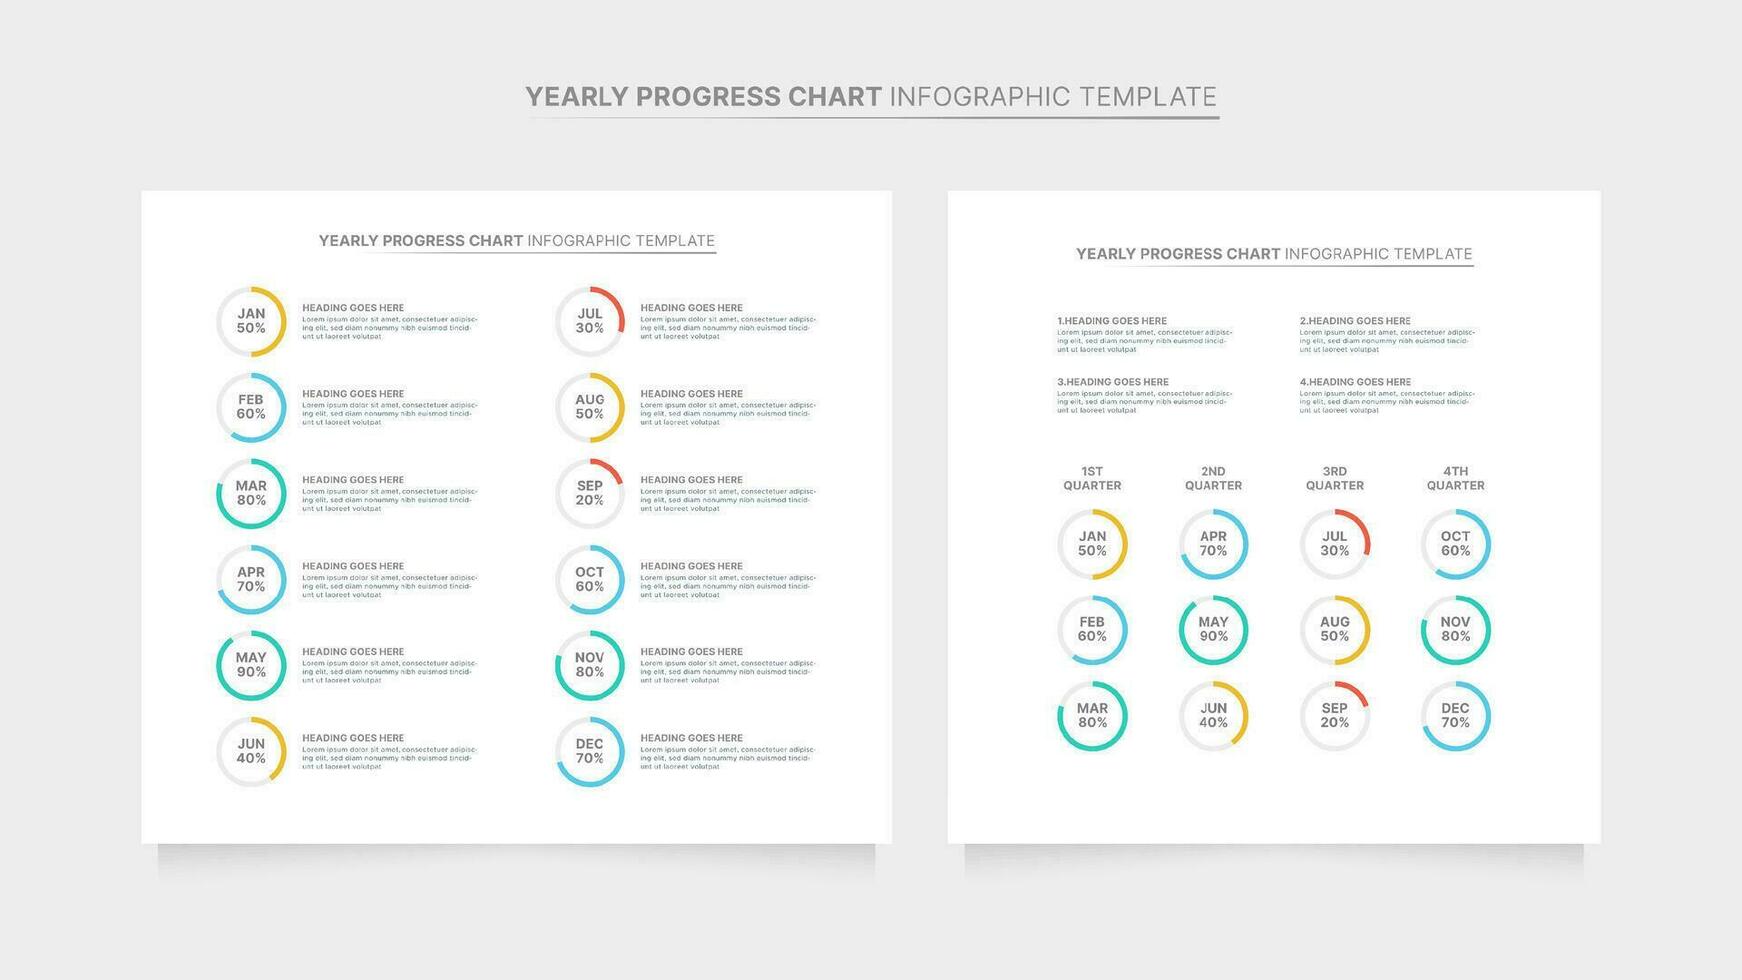 Yearly Progress Chart Infographic Template Design vector